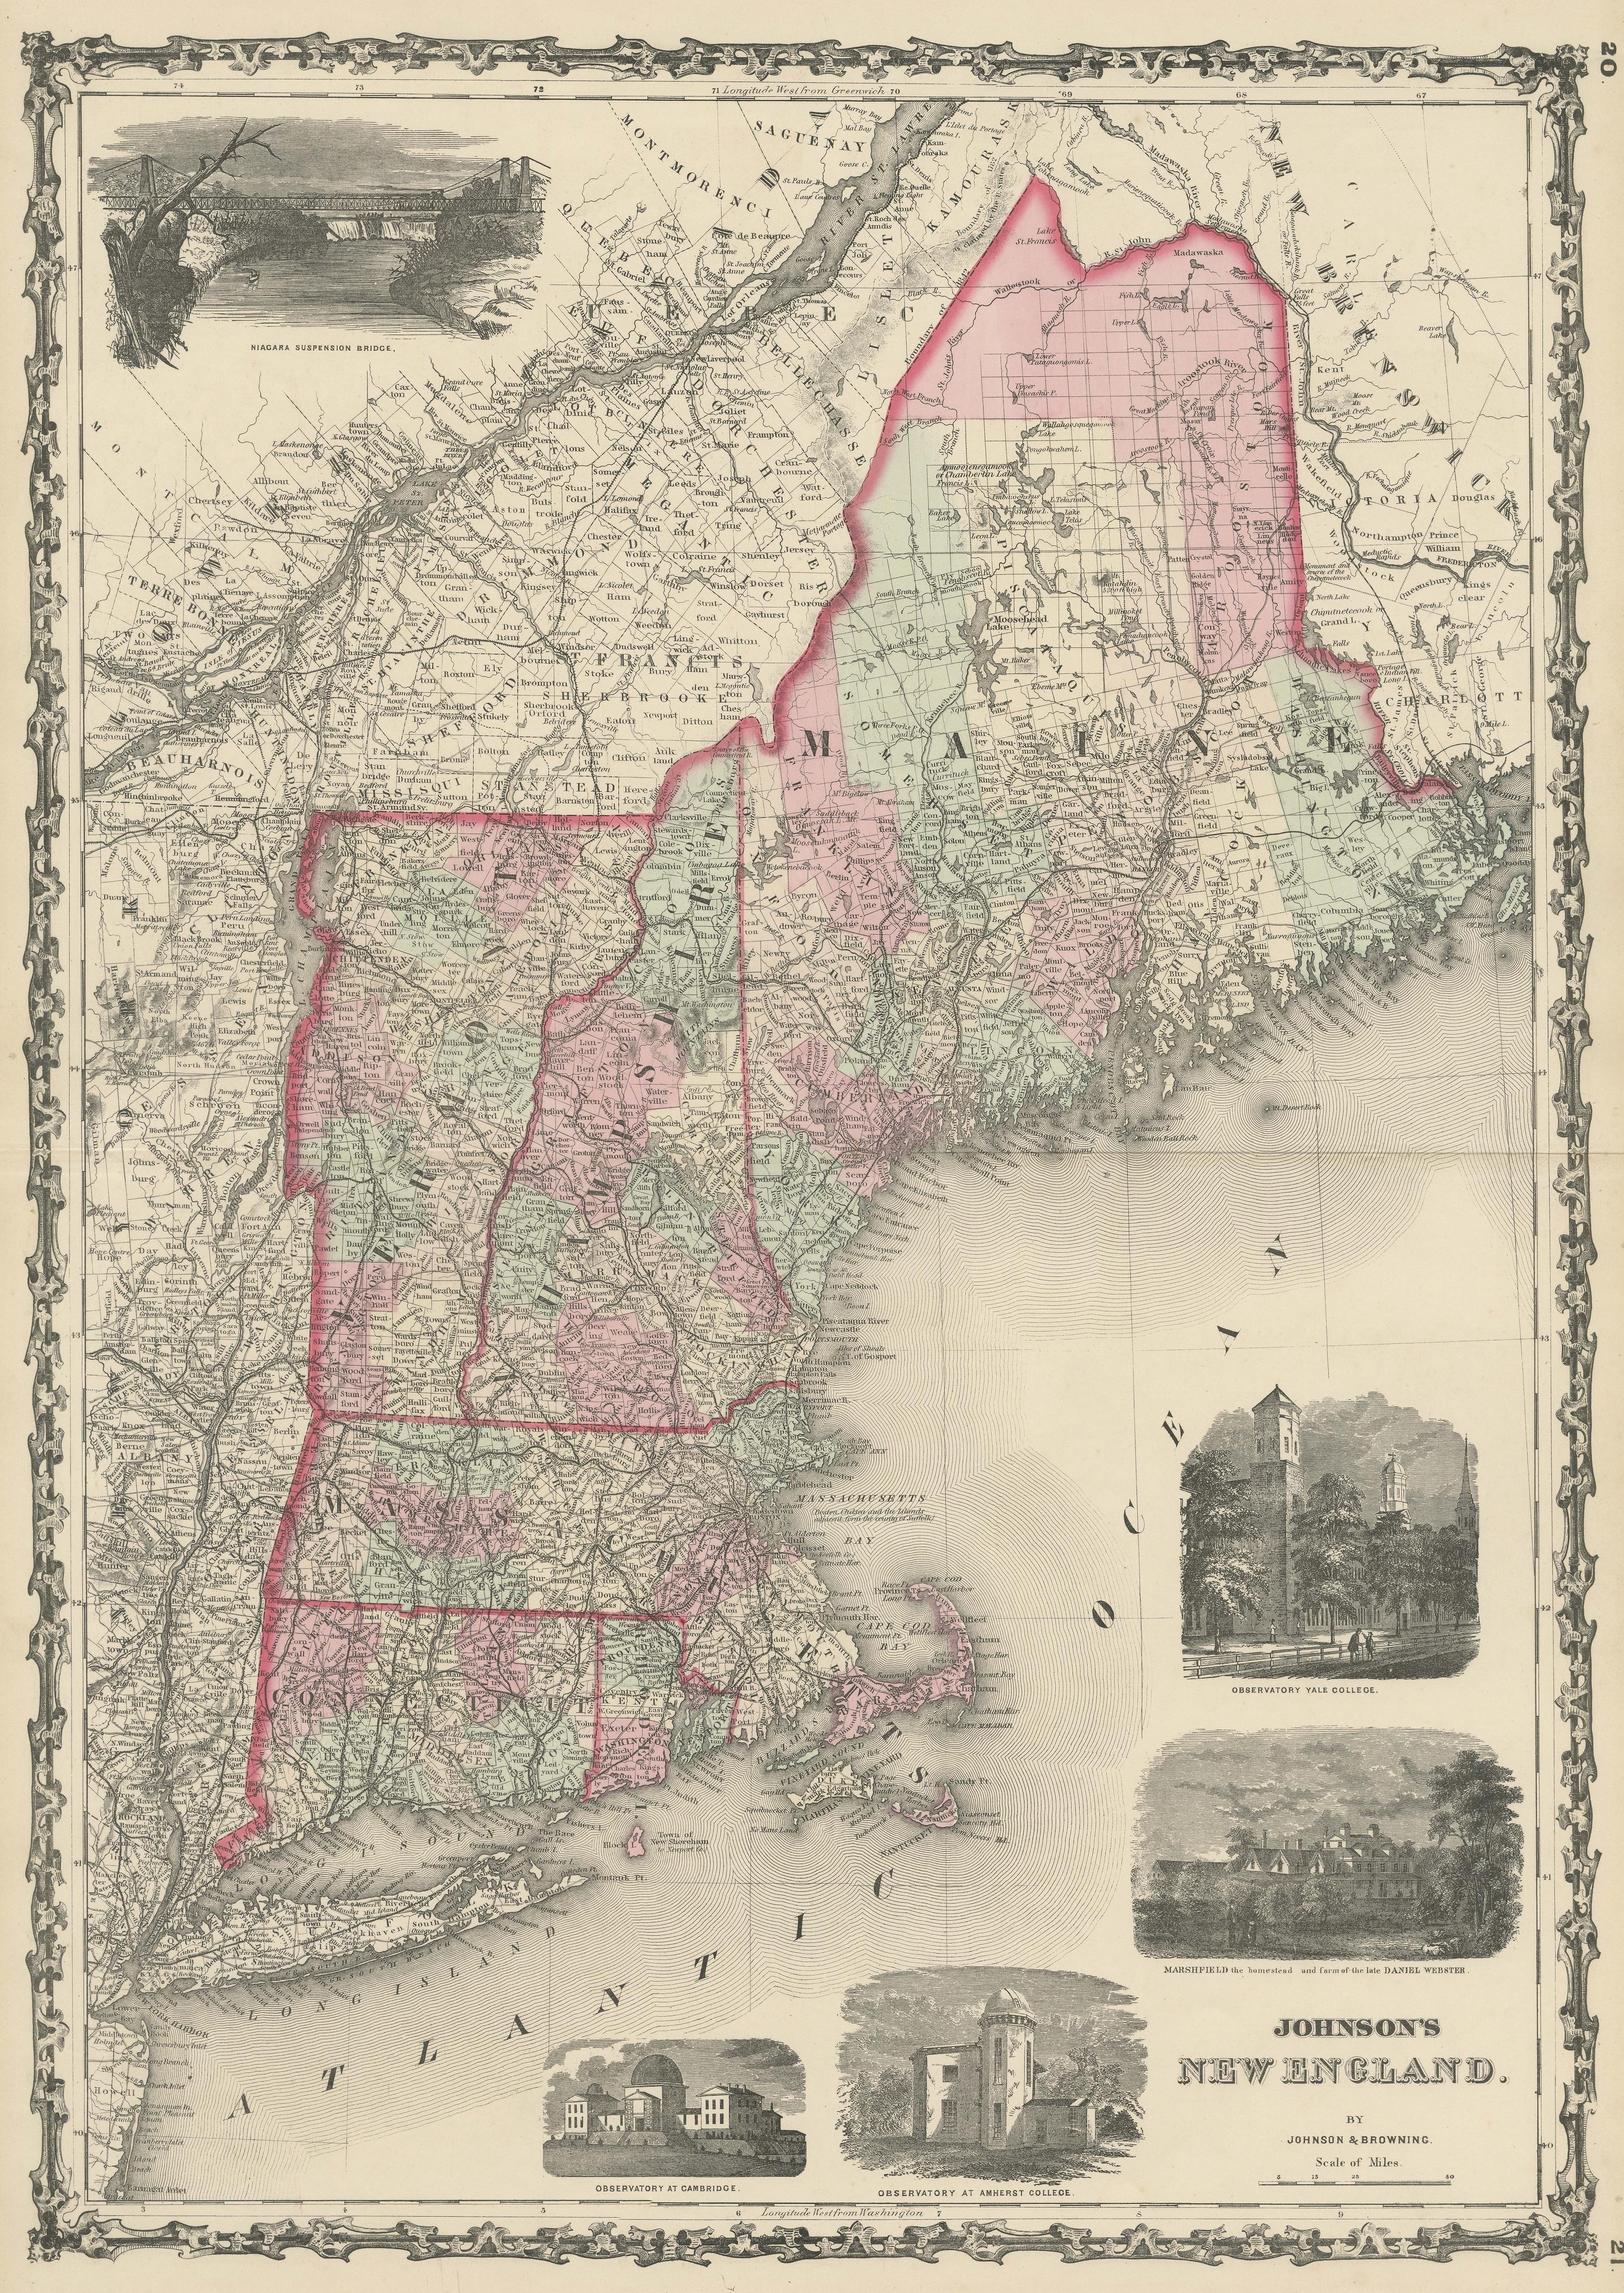 new england map with towns